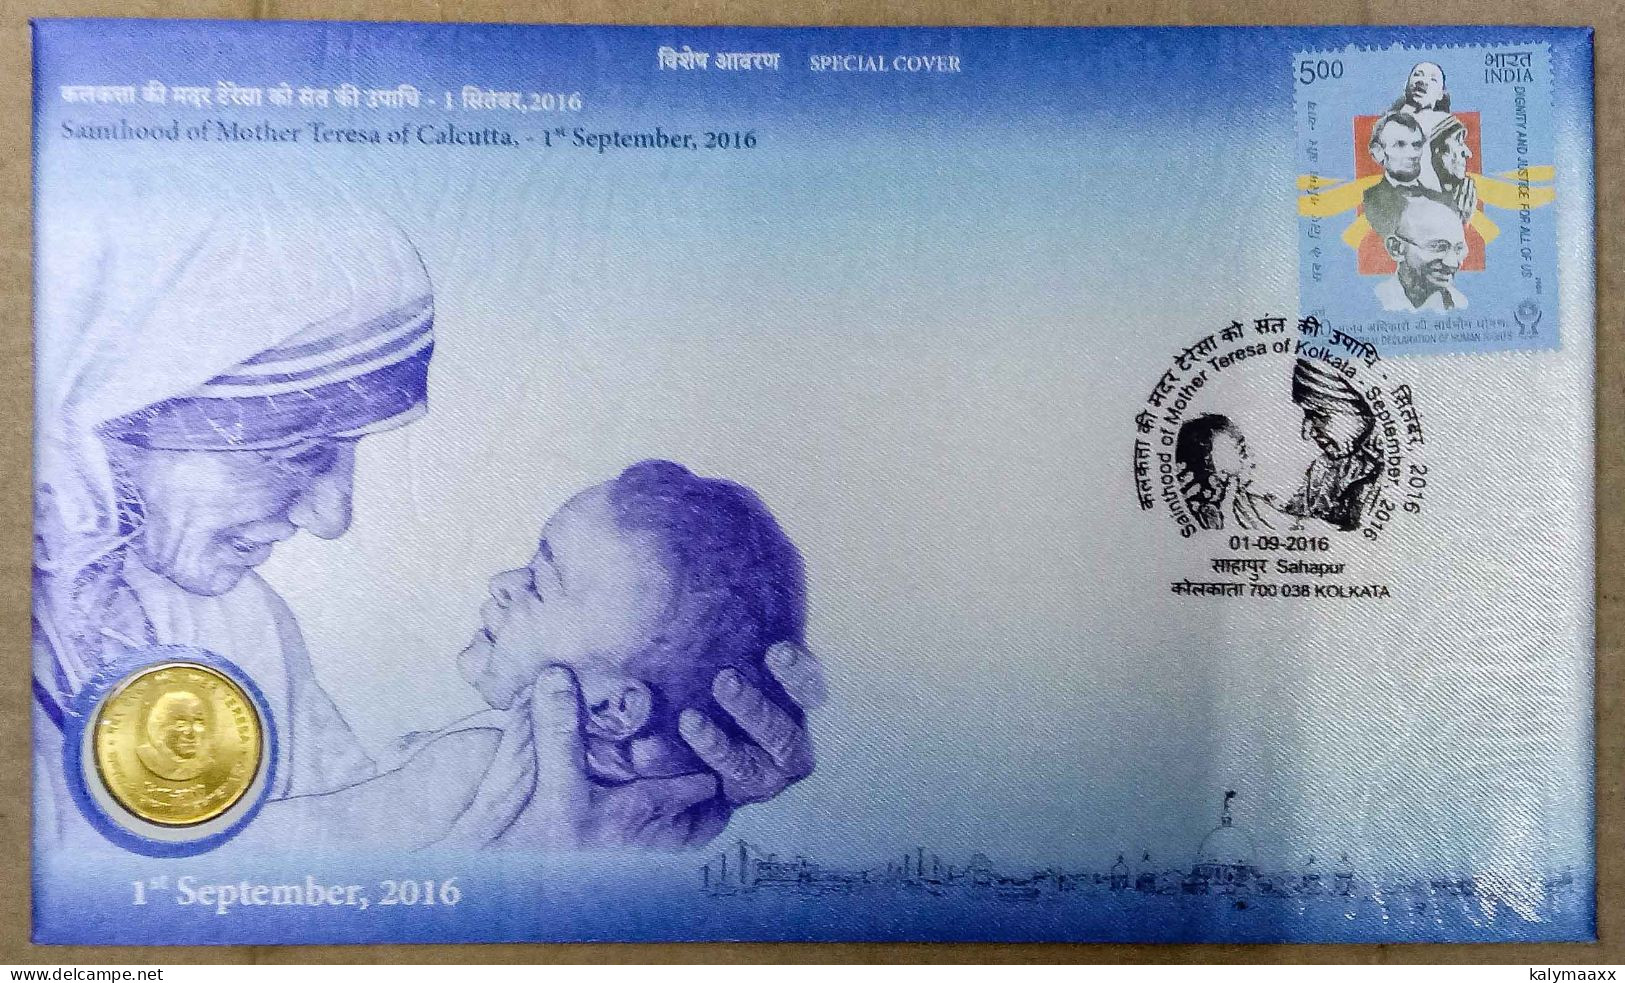 INDIA 2016 SAINTHOOD OF MOTHER TERESA, SPECIAL COIN COVER OF MOTHER TERESA, SPECIAL COVER, LIMITED ISSUE - Mutter Teresa